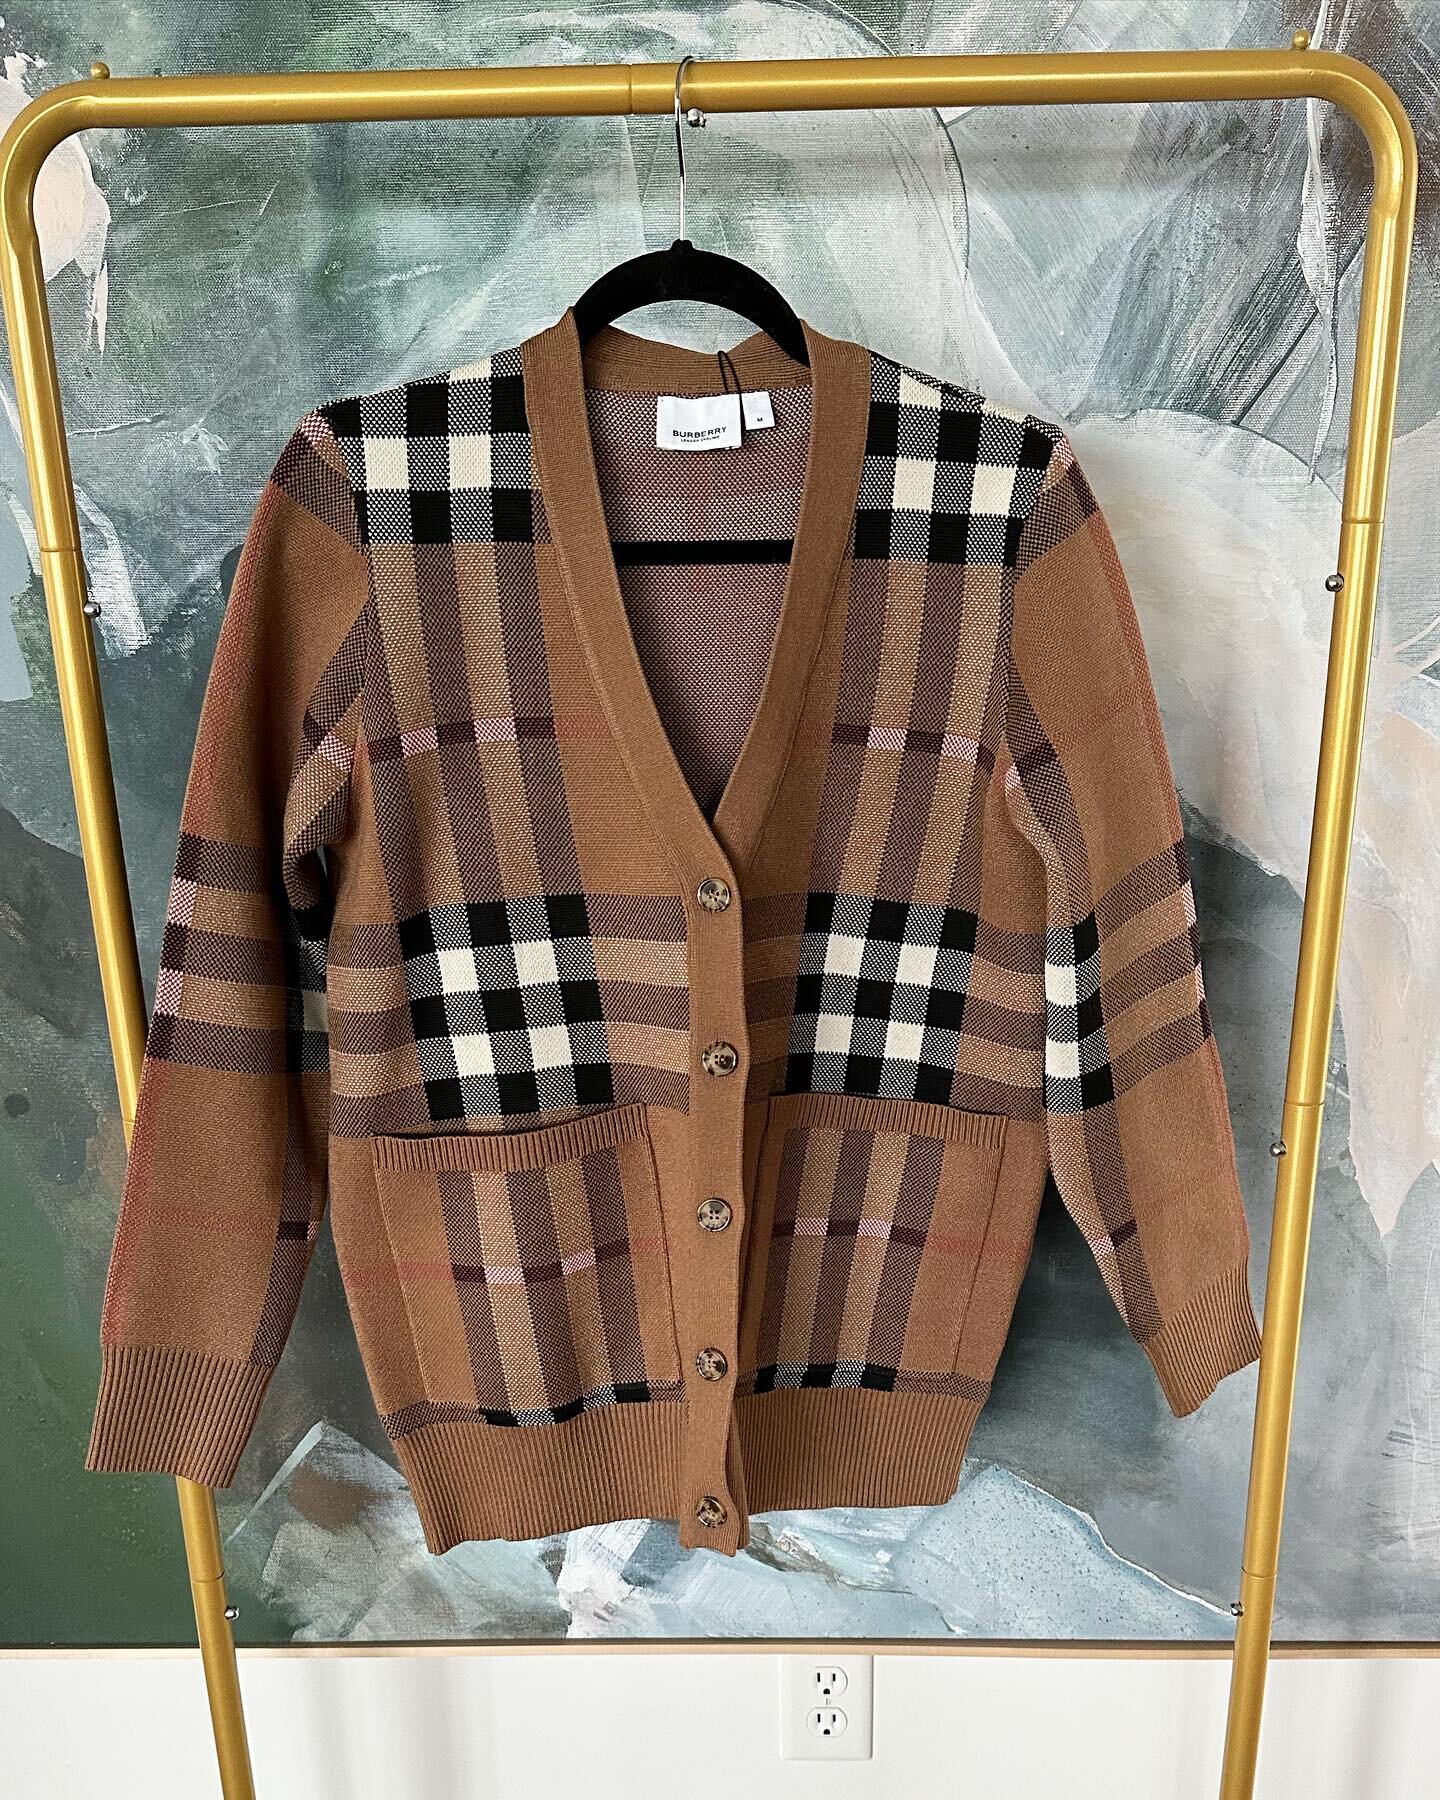 Birch Brown 30% Cashmere/70%Wool Check Cardigan Sweater in like new condition size M. This is so classic, cozy and comfortable. $695 (retail+tax over $1400) Xo

*Nicole Cripe Style is not affiliated/associated/authorized/endorsed by any of the brands